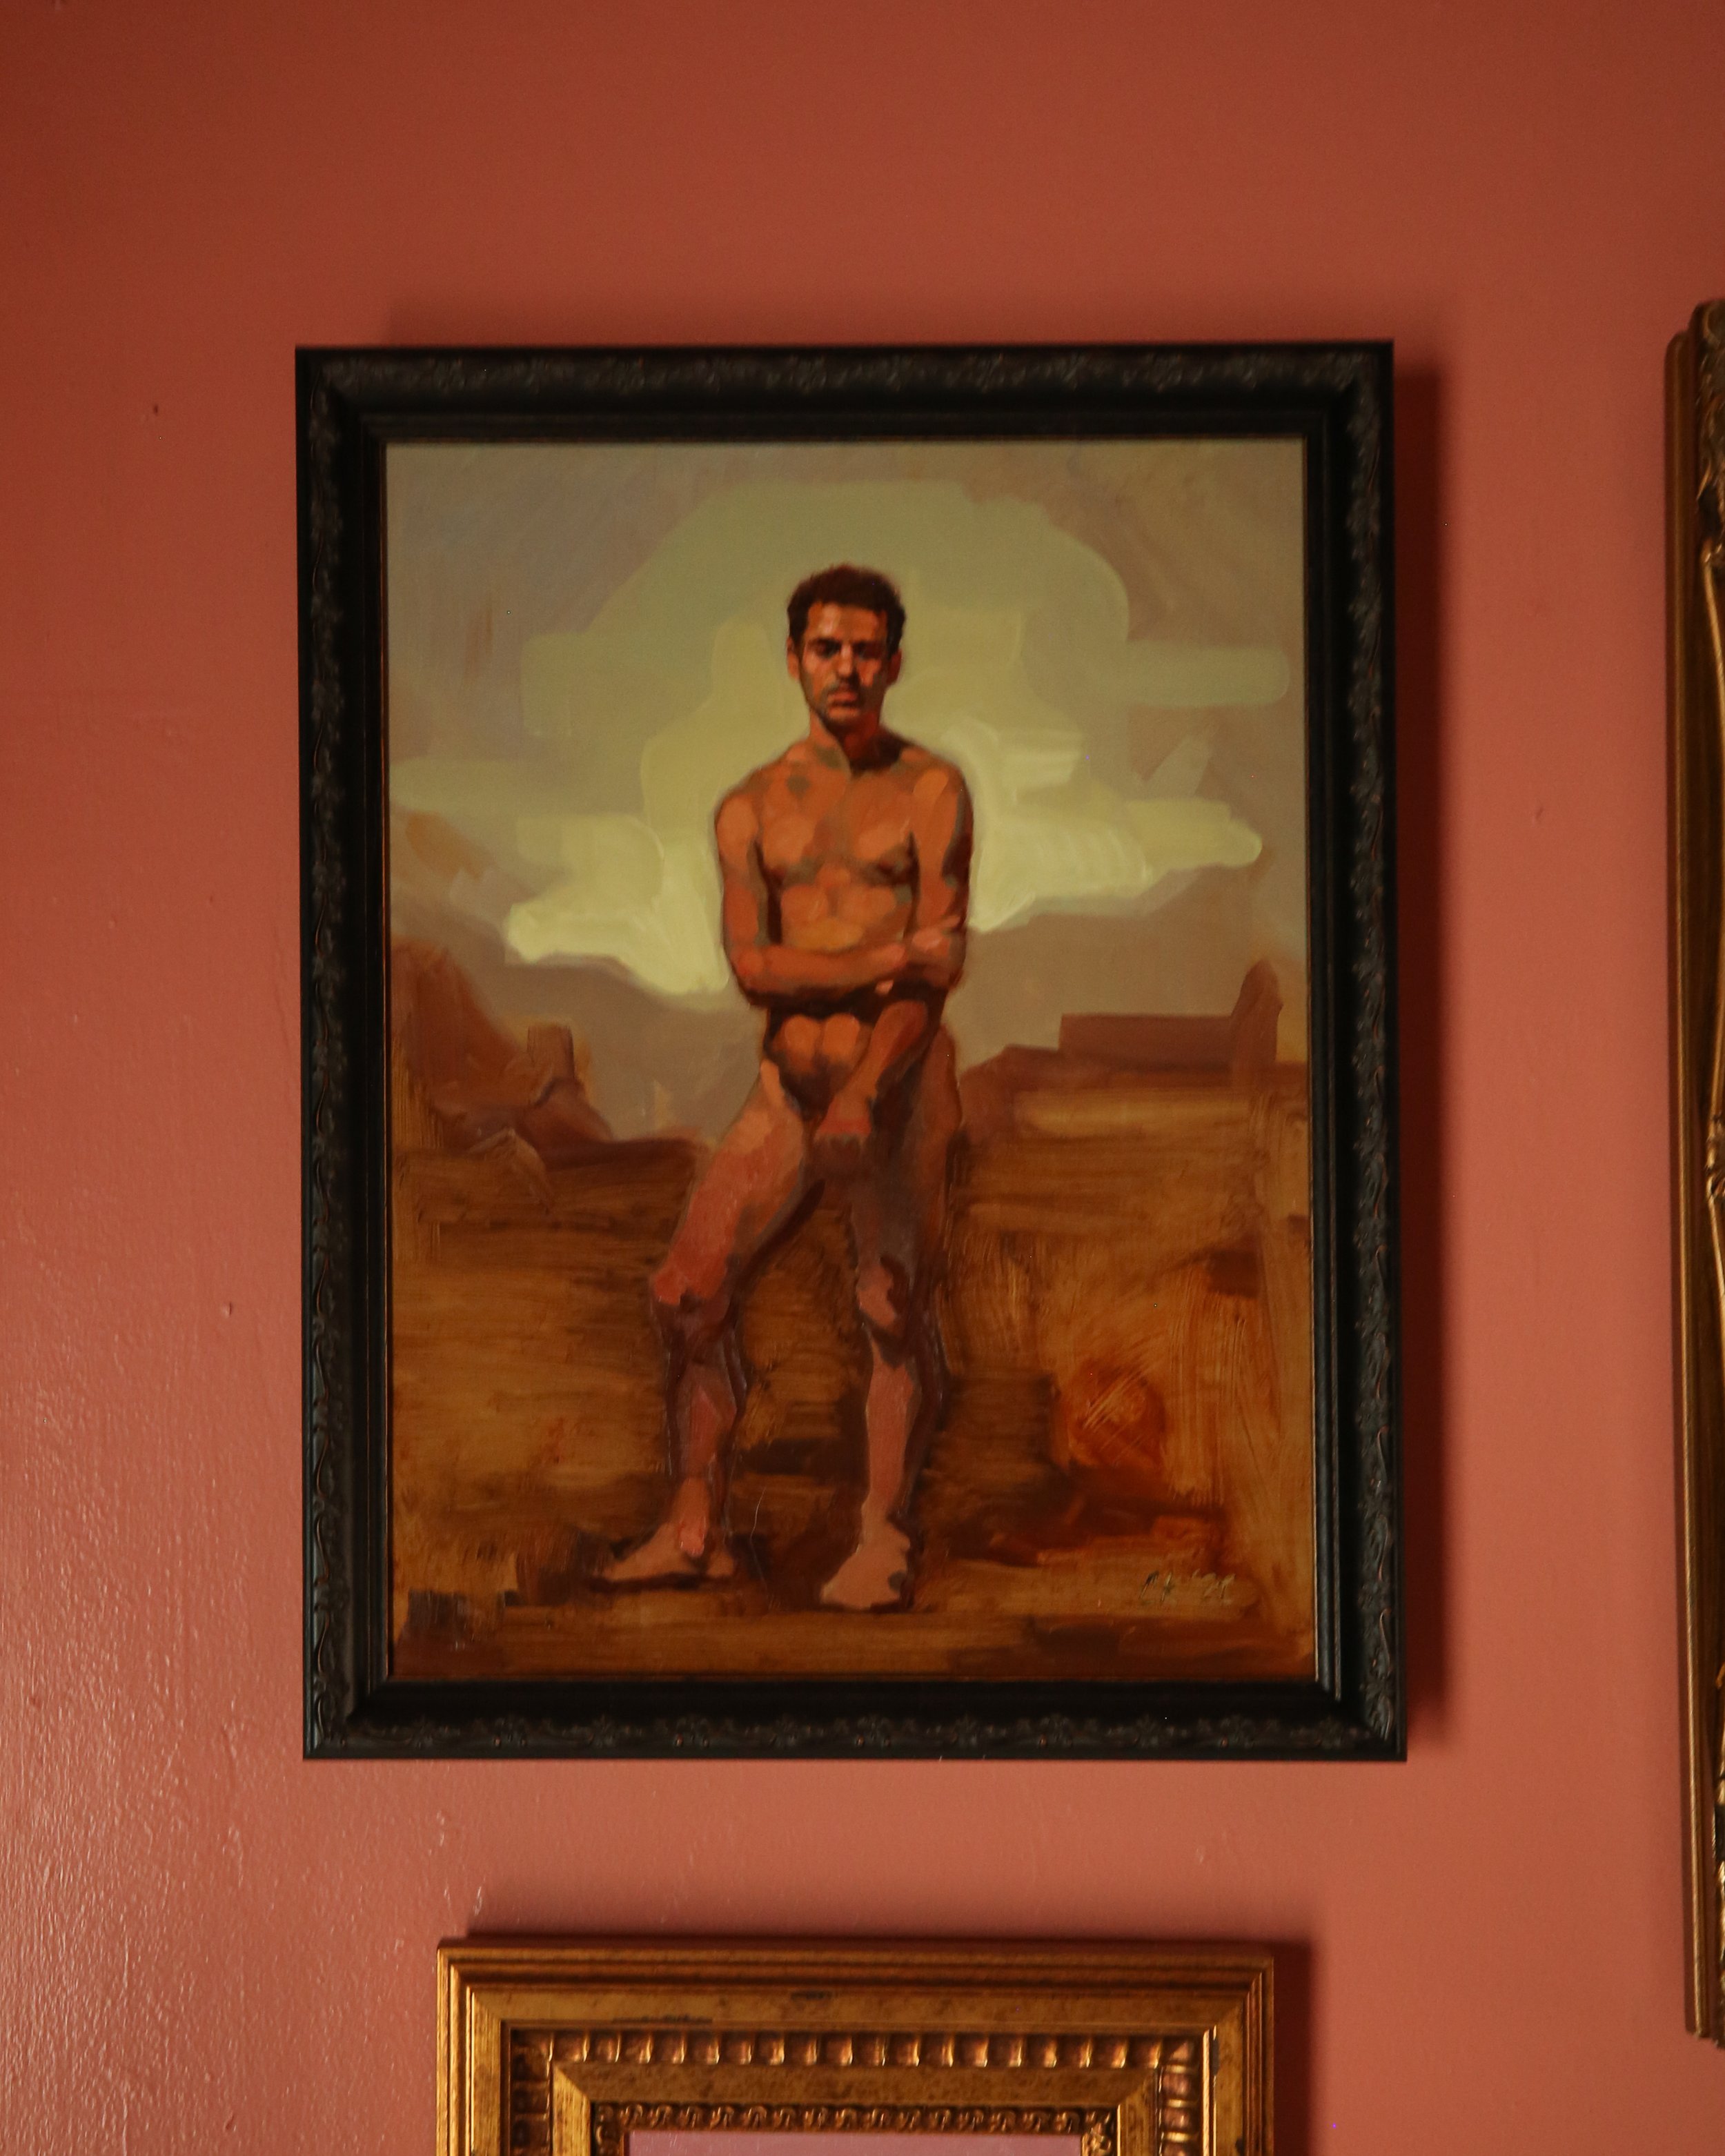 "Male nude" by Chris Kelly, purchased from artist